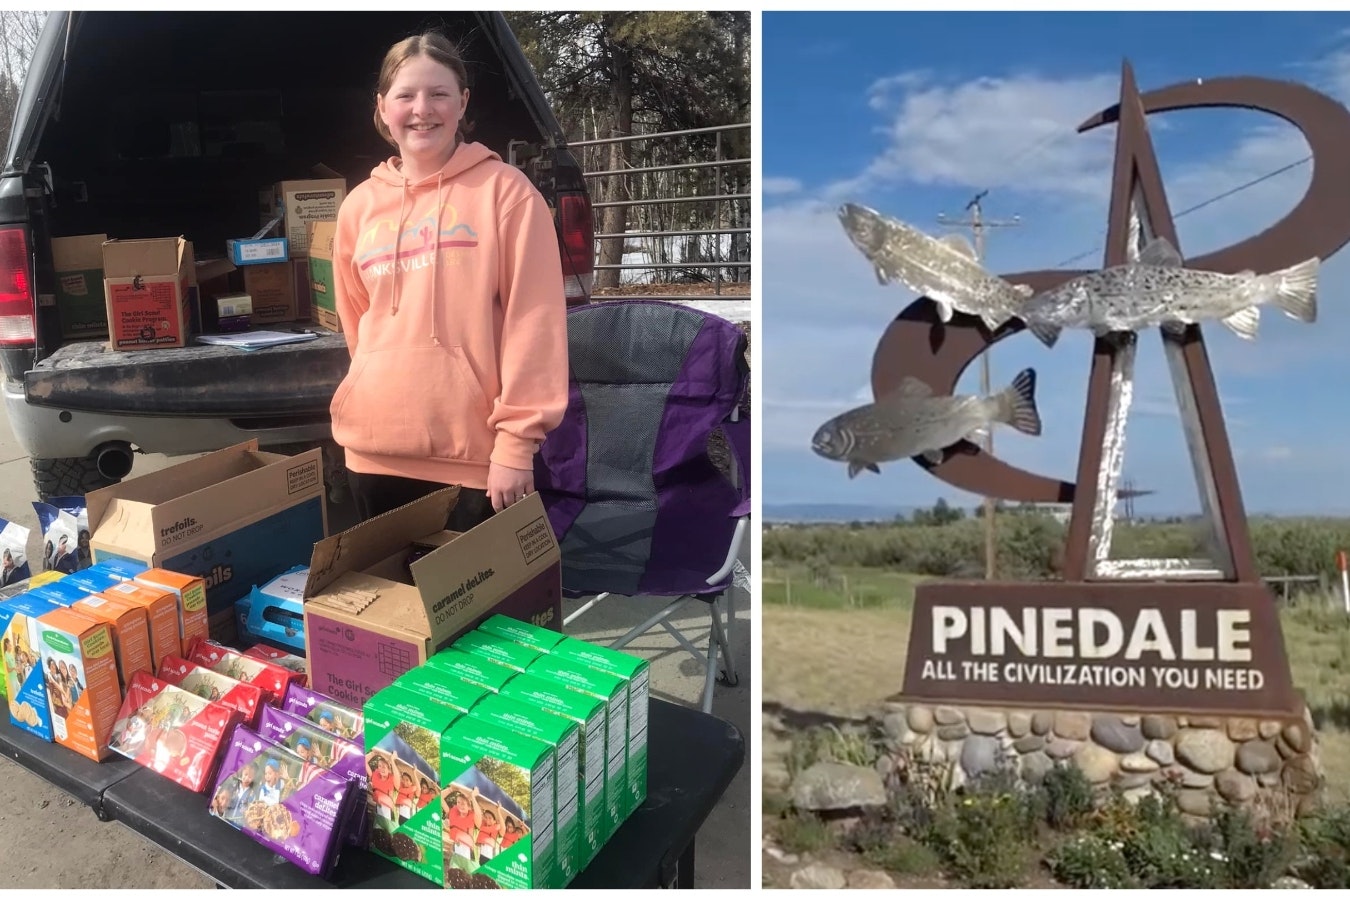 Emma McCarroll sells Girl Scout Cookies around Pinedale, Wyoming. Town officials report they've been receiving nasty and threatening responses to a story about McCarroll's mom being cited and fined more than $400 for selling cookies where they shouldn't have been.